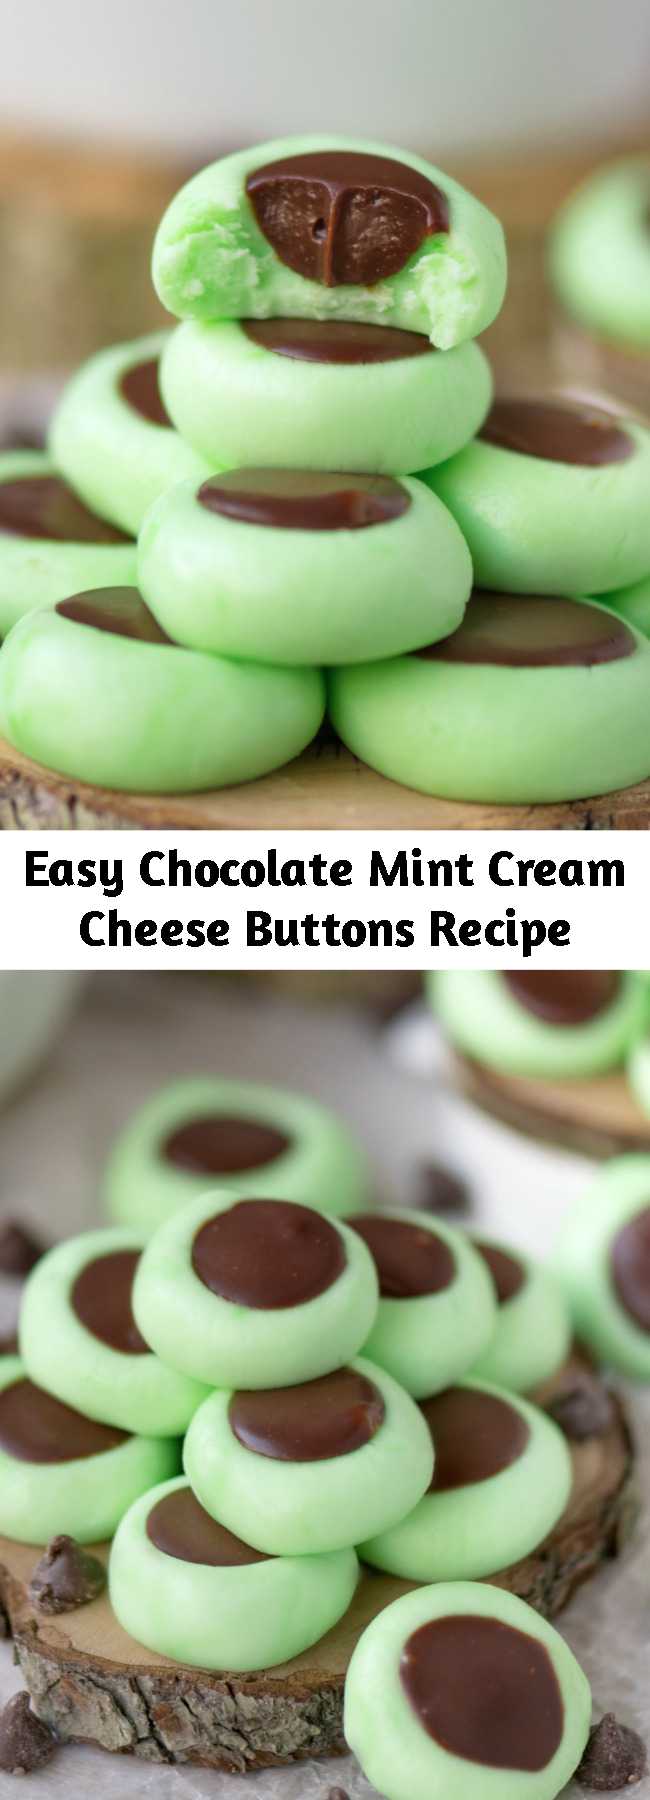 Easy Chocolate Mint Cream Cheese Buttons Recipe - These Chocolate Mint Cream Cheese Buttons are perfect for all occasions! Lovely mint flavored cream cheese mints filled with a decadent chocolate ganache. Guaranteed to be a hit with your chocolate and mint loving friends and family! #chocolate #mint #candy #dessert #recipe #Christmas #StPatricksDay